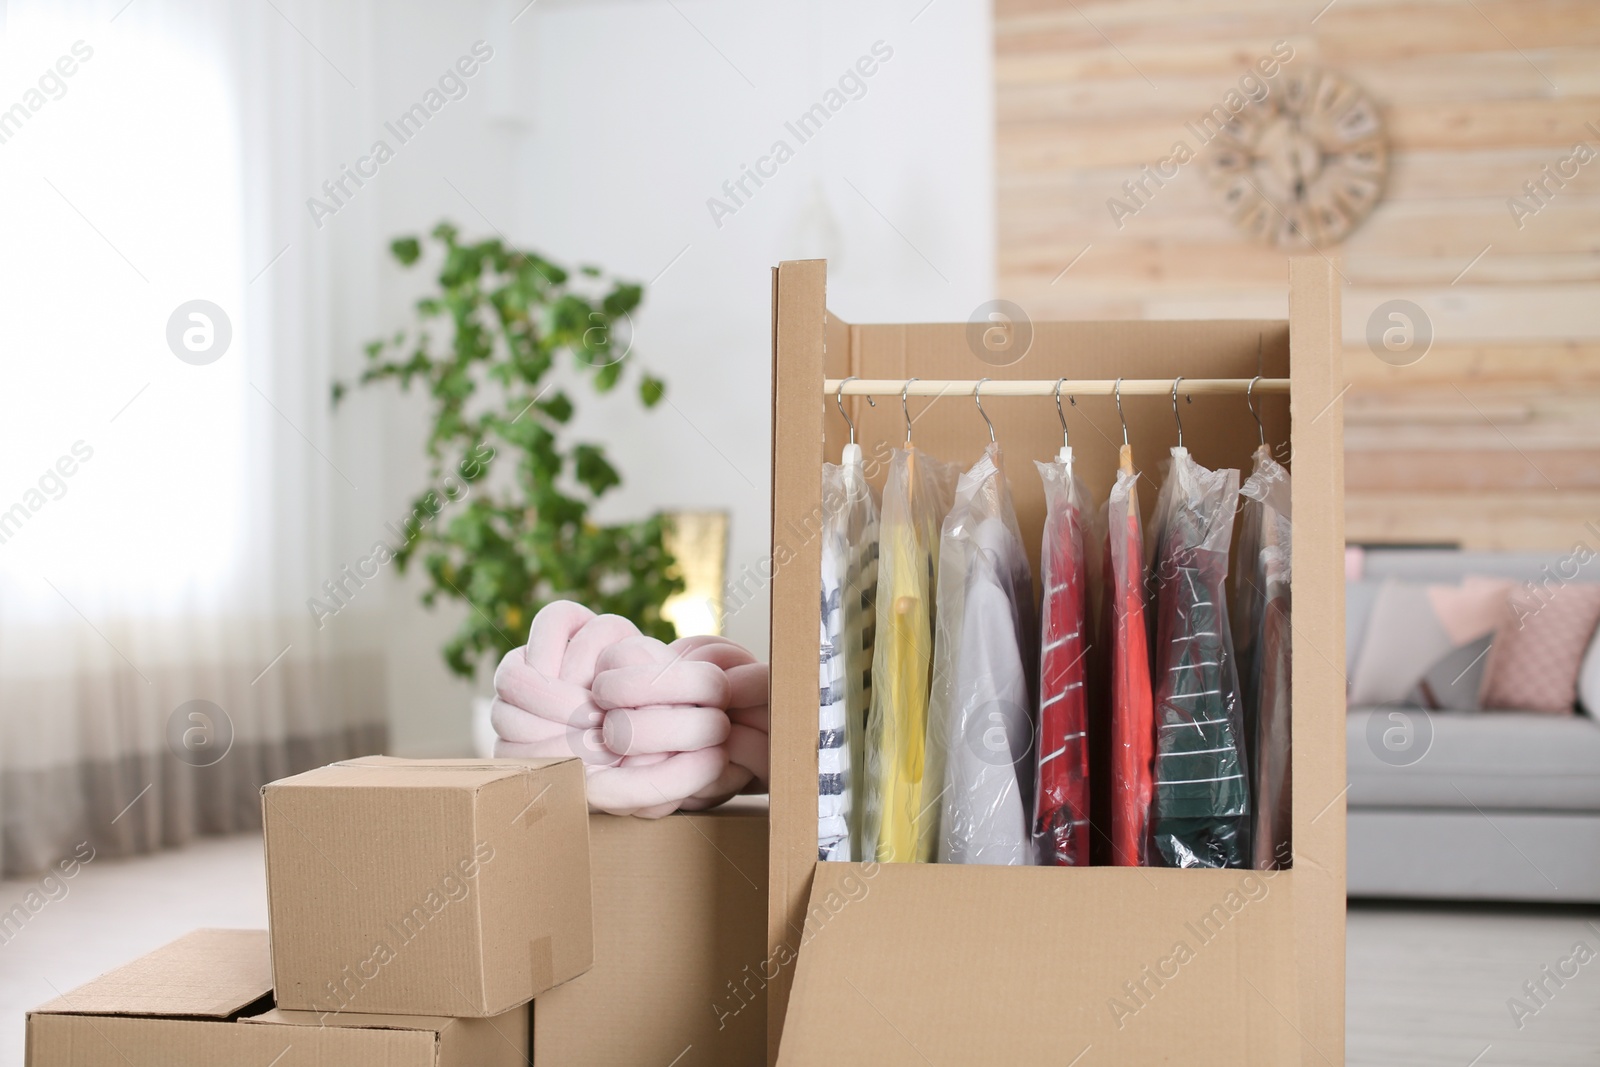 Photo of Cardboard wardrobe box with clothes on hangers in living room